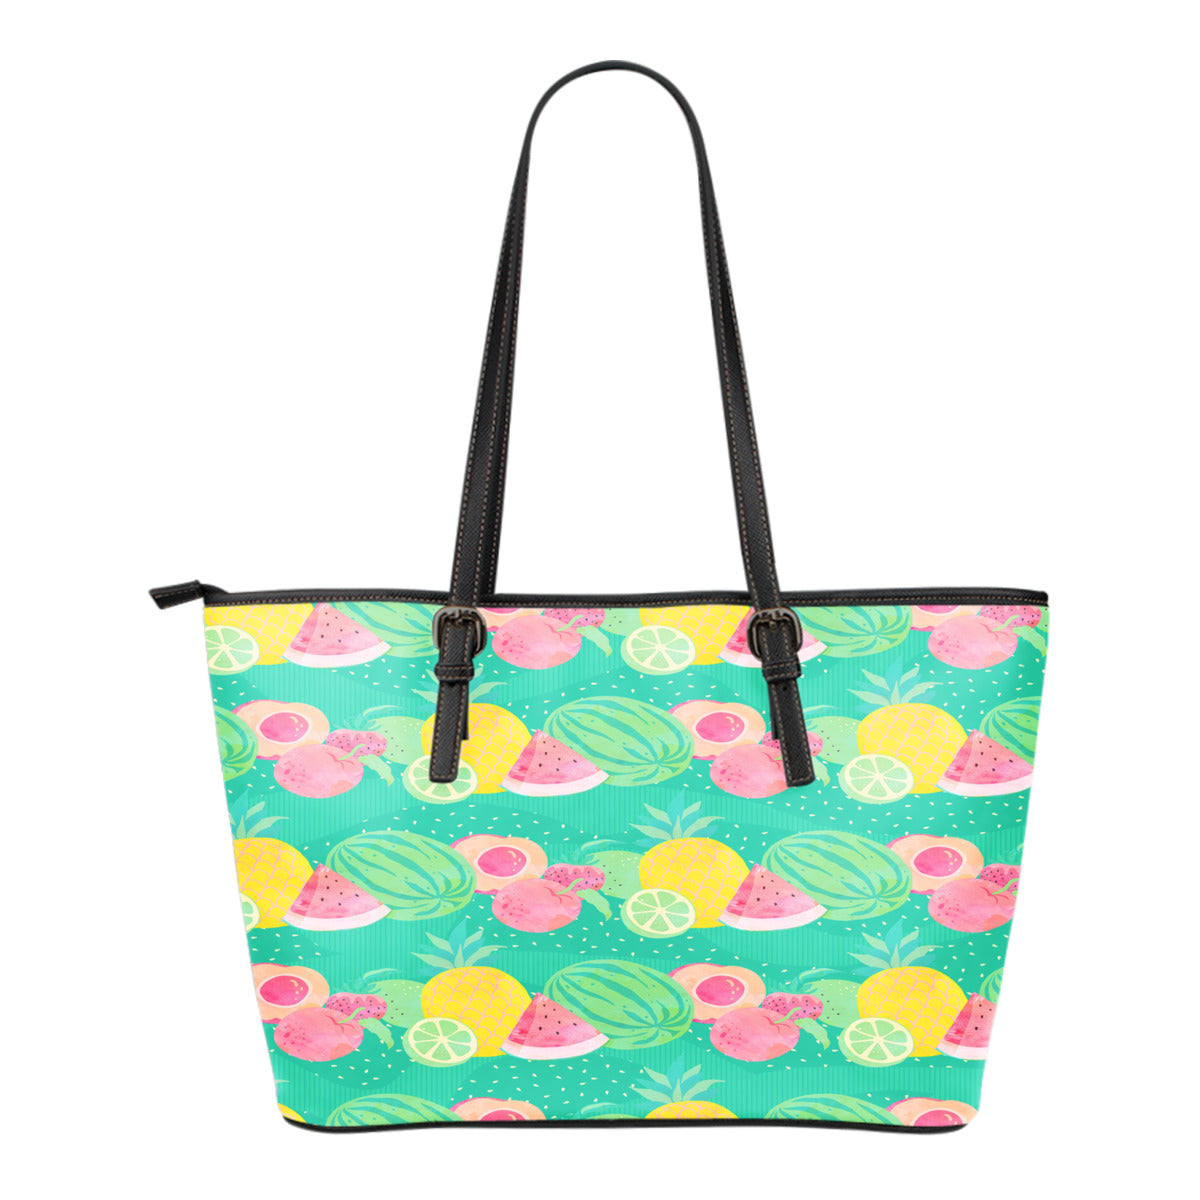 Fruits Themed Design C3 Women Large Leather Tote Bag